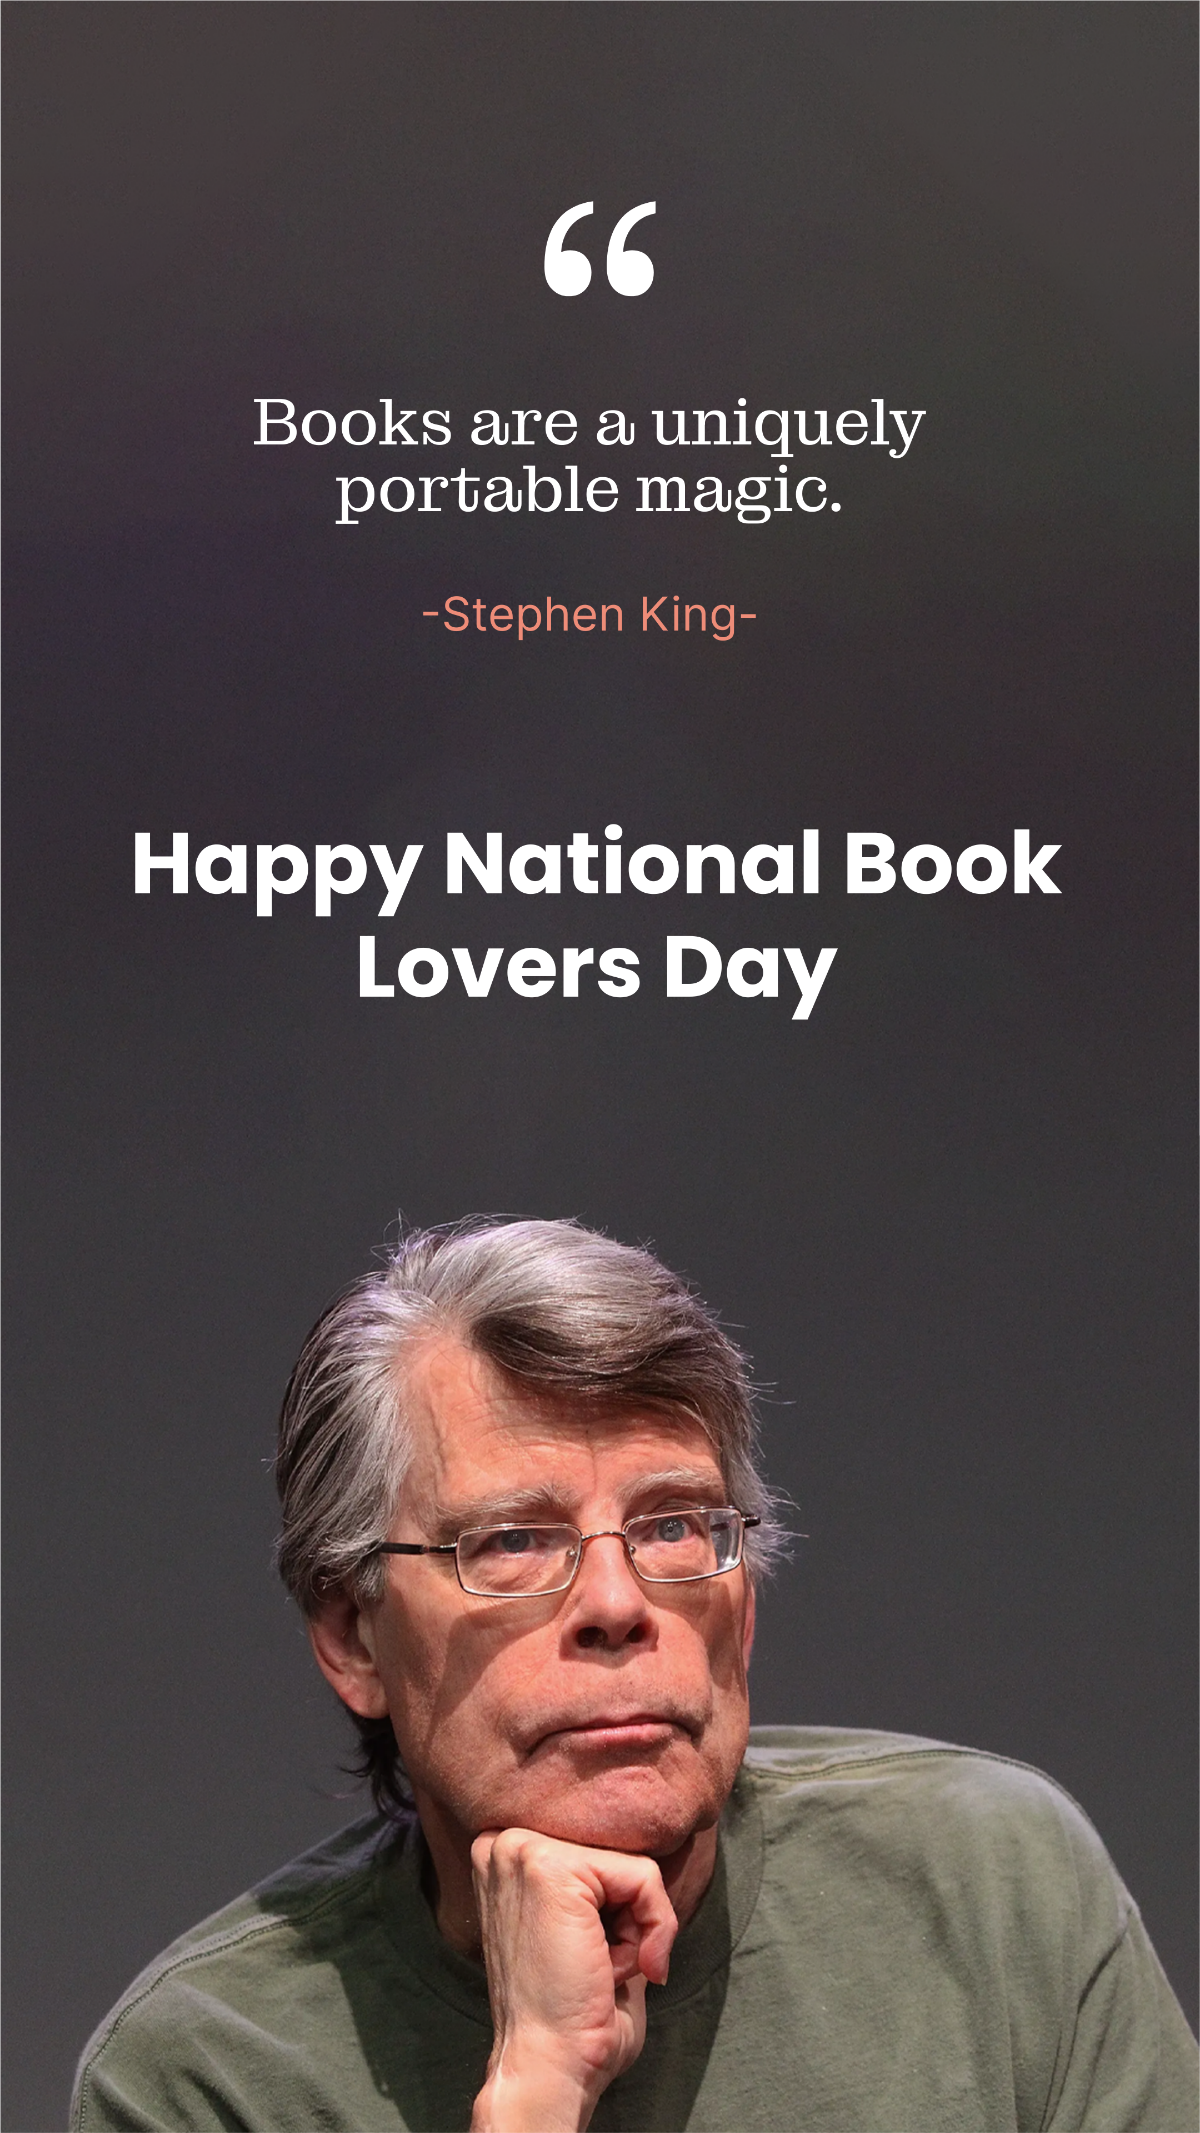 Happy National Book Lovers Day Quote